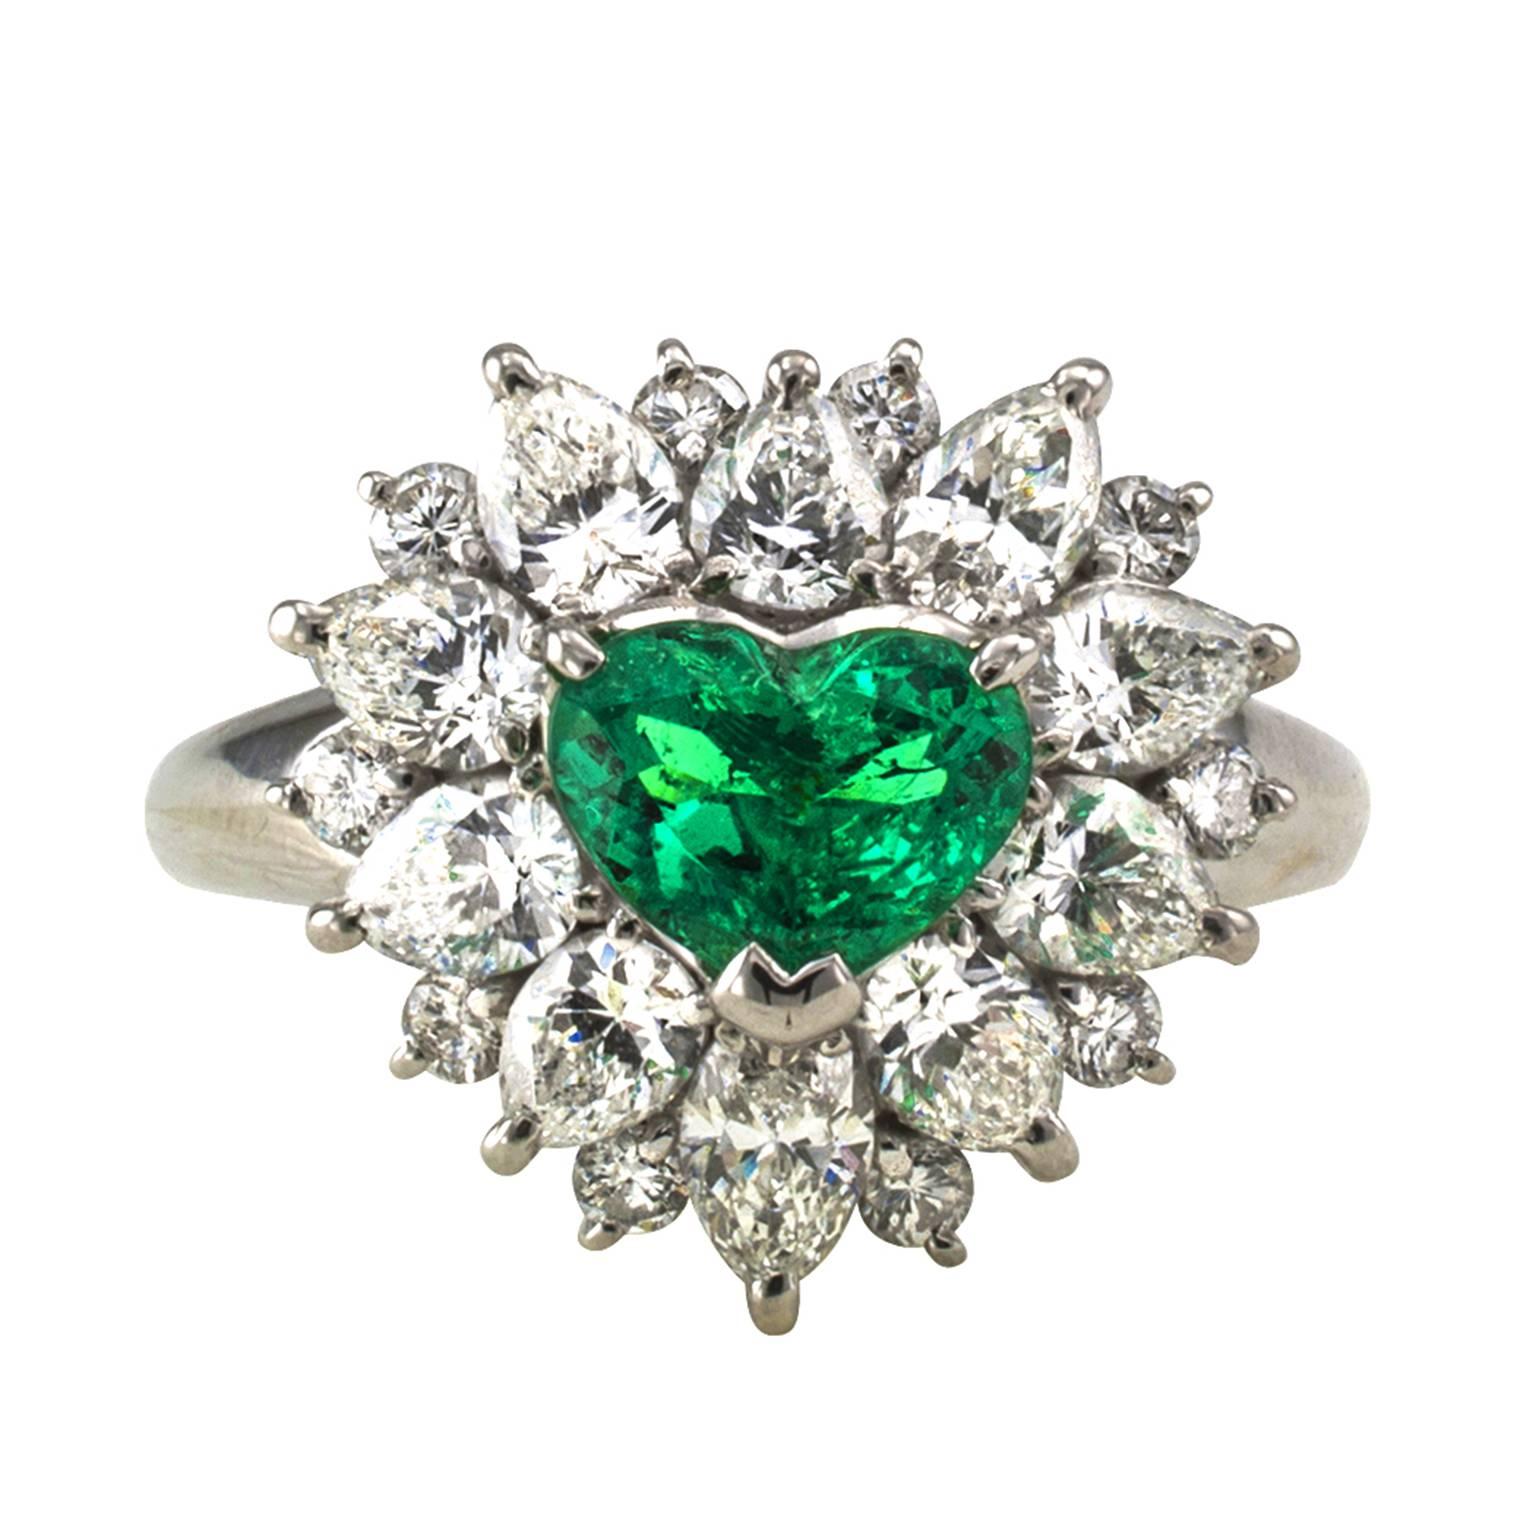 Heart-Shaped Emerald and Diamond Cluster Ring

Cluster rings can be found in many denominations, but one as special as this is a rare find, centering upon a very fine heart-shaped emerald weighing 0.80 carat, within a stepped border comprising